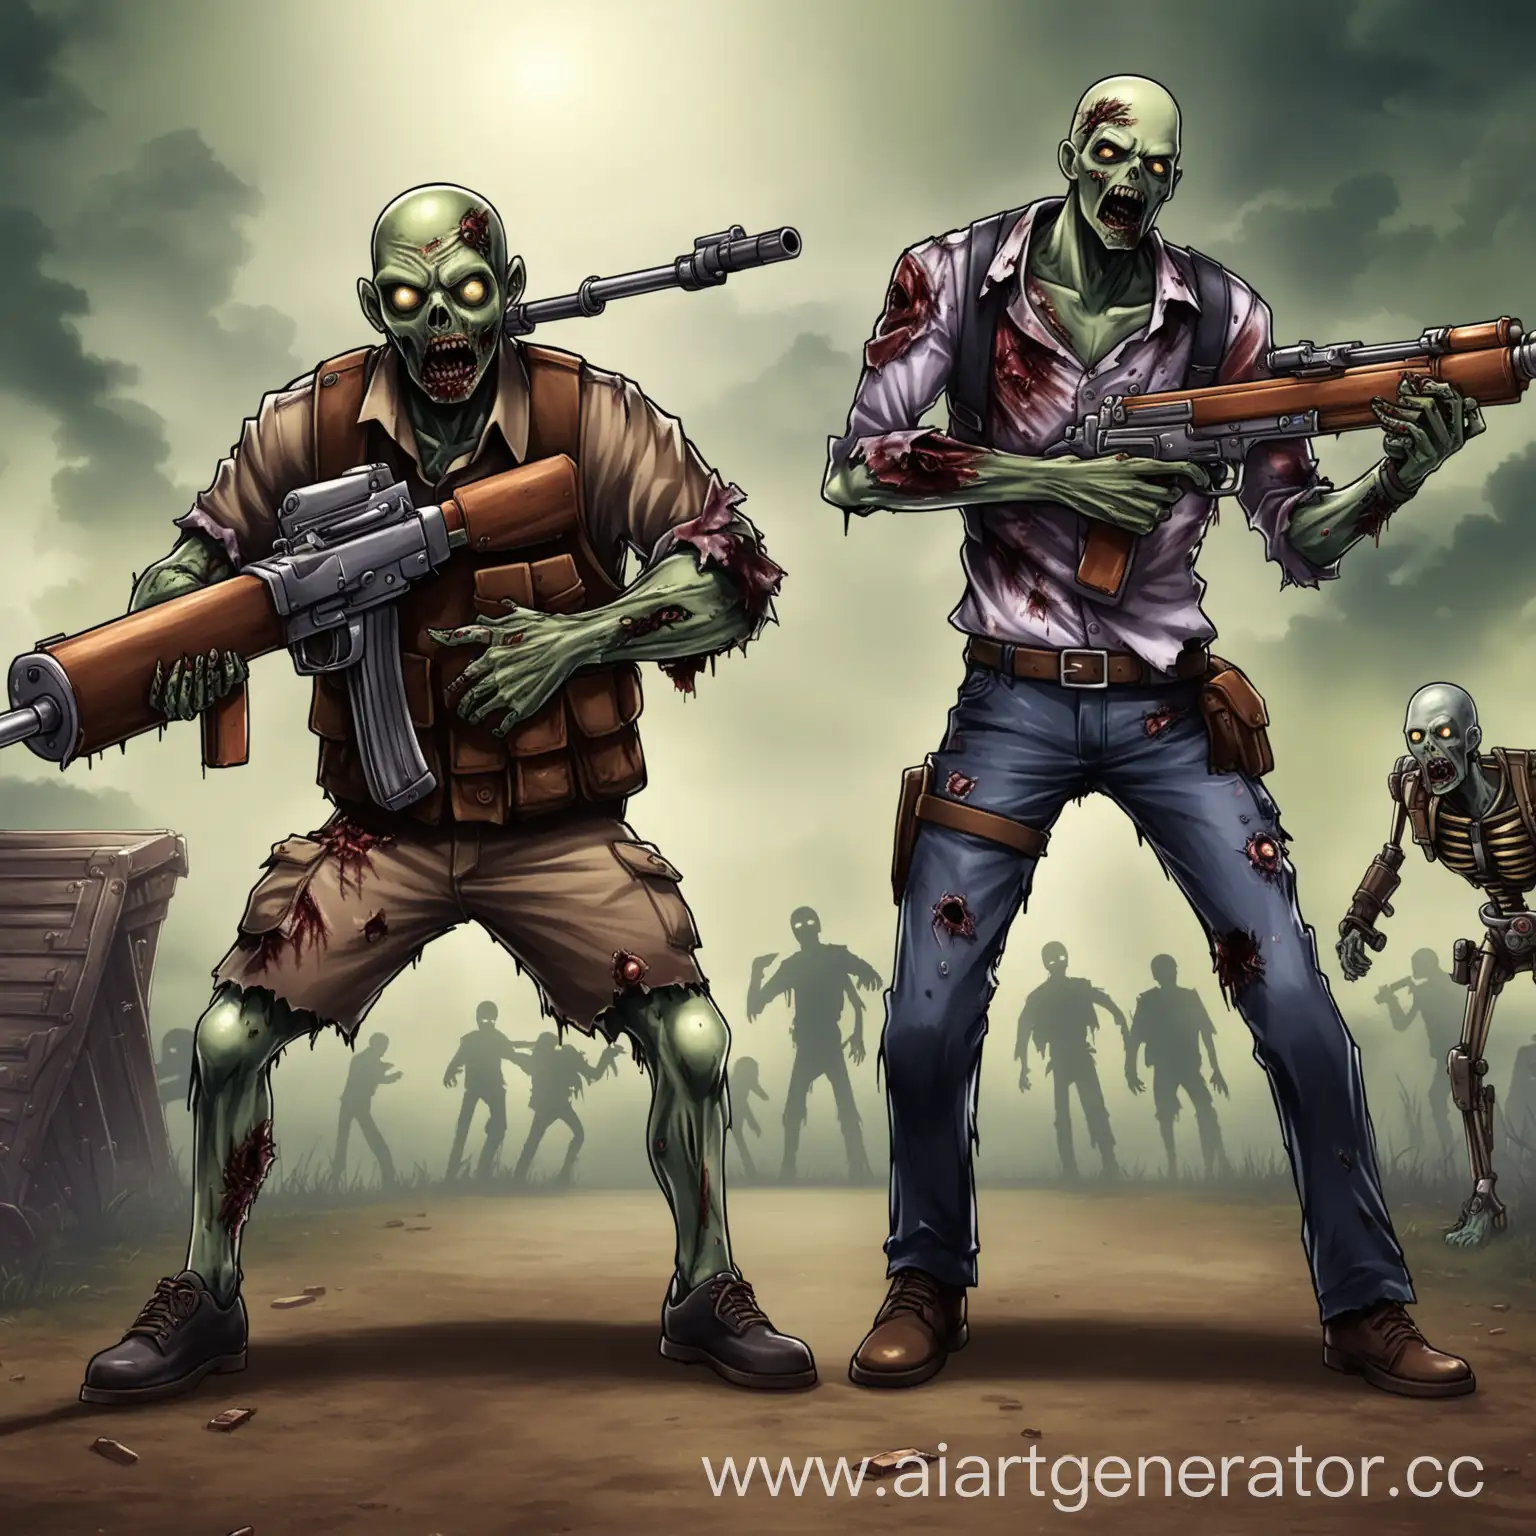 Epic-Standoff-Between-Zombie-and-Gunner-in-PostApocalyptic-Setting